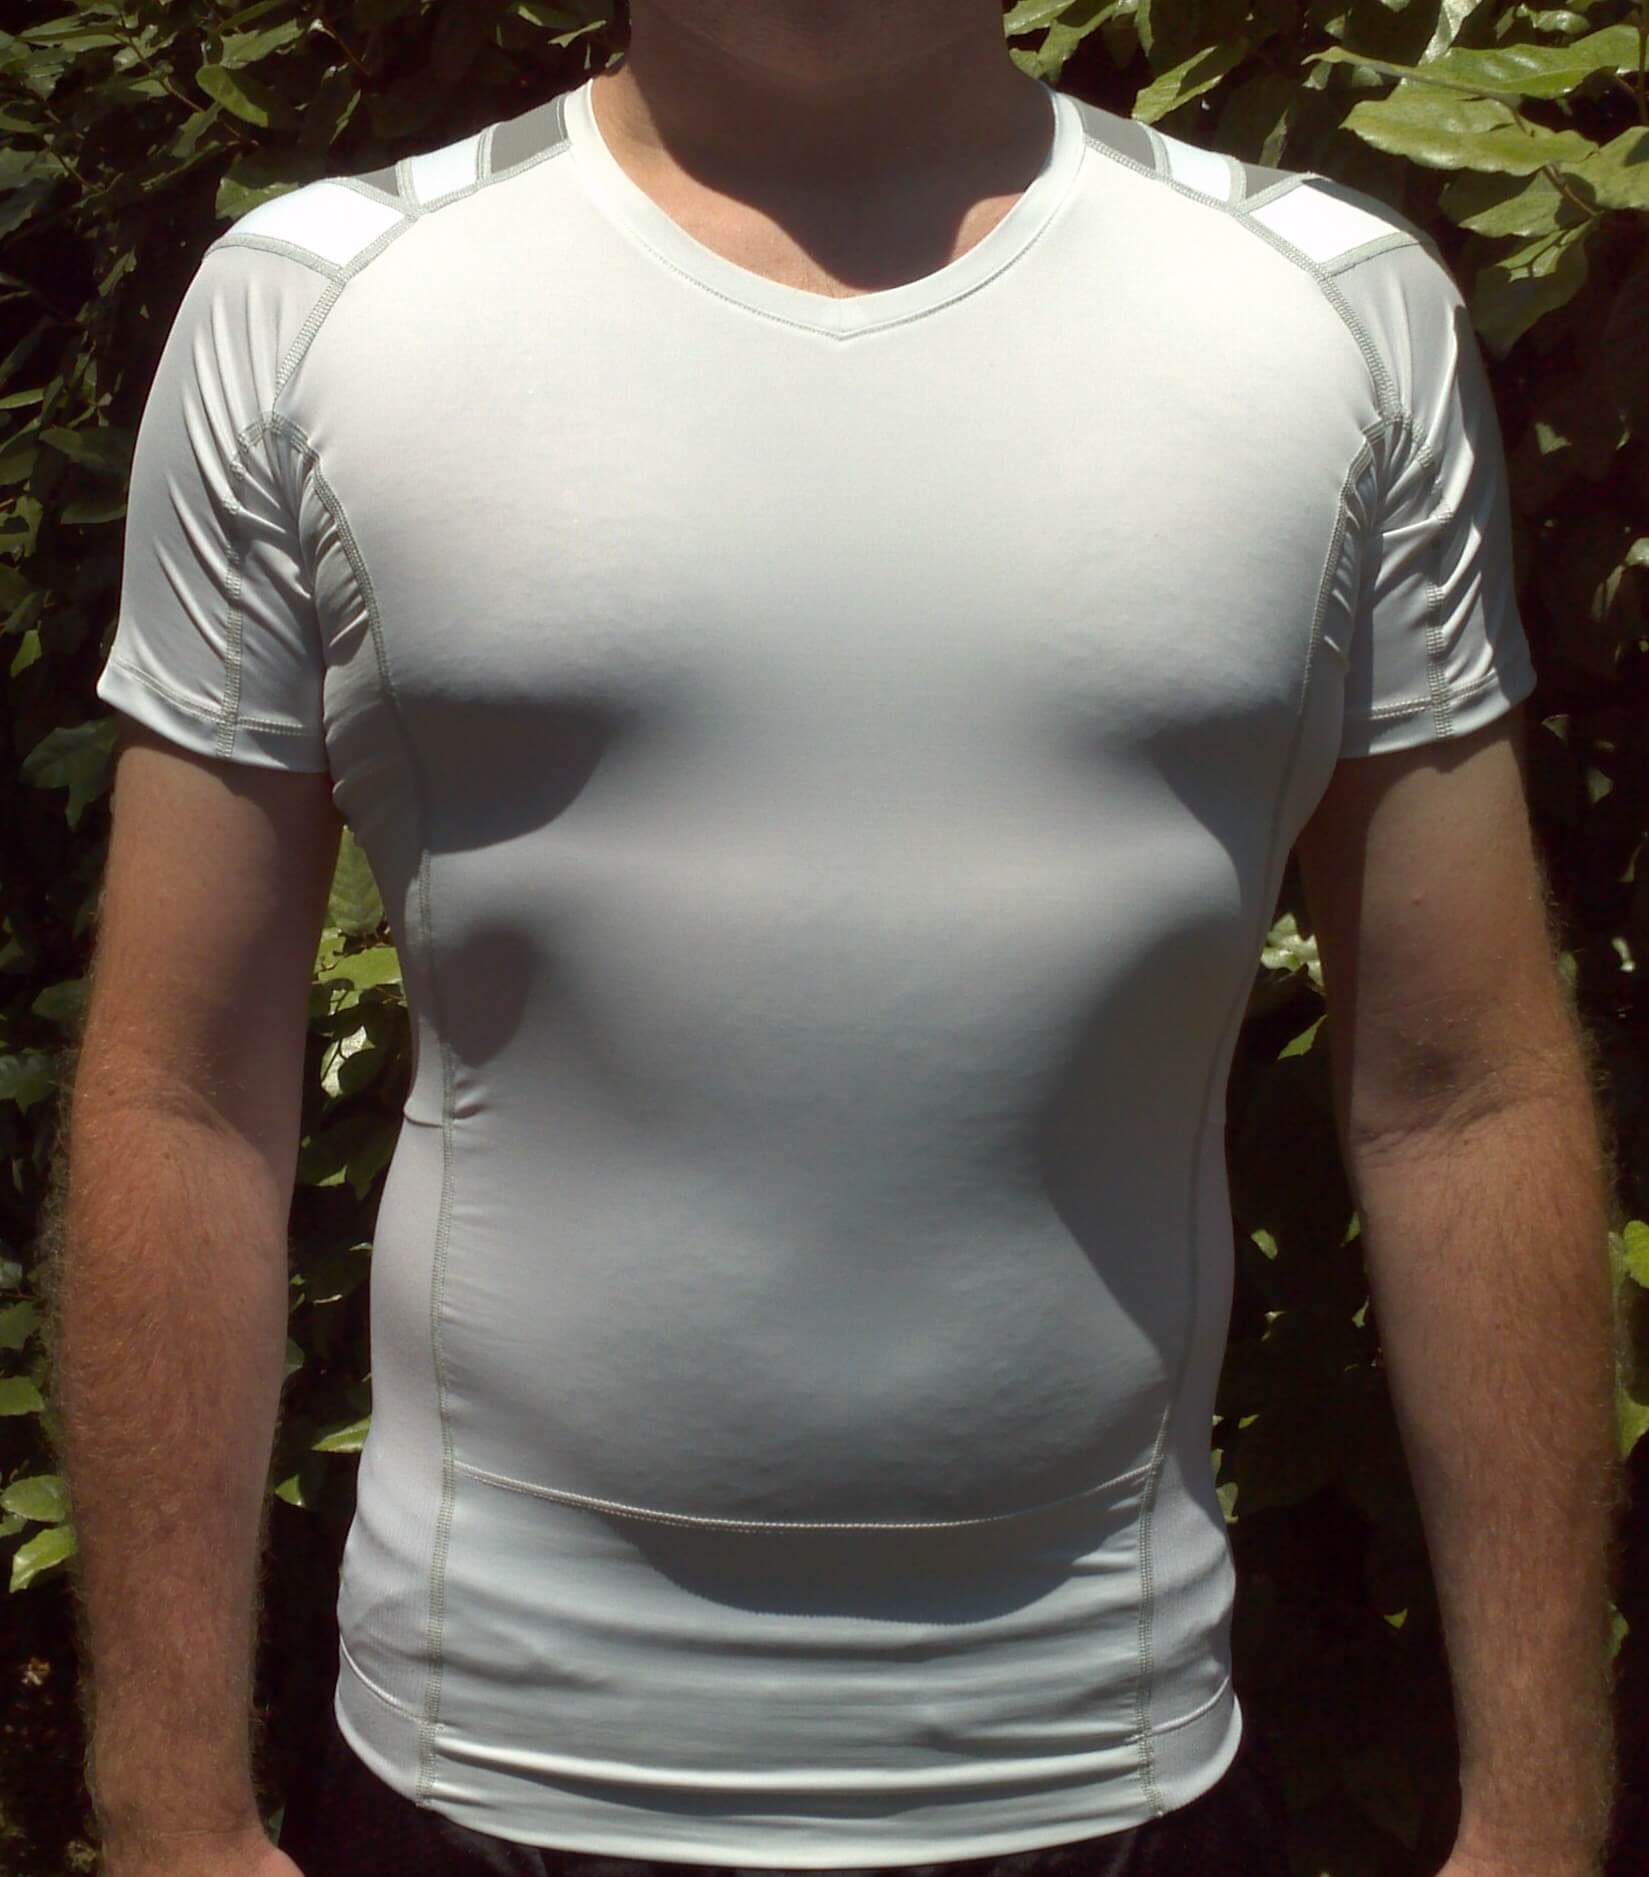 Product review of the Alignmed Posture Shirt 2.0